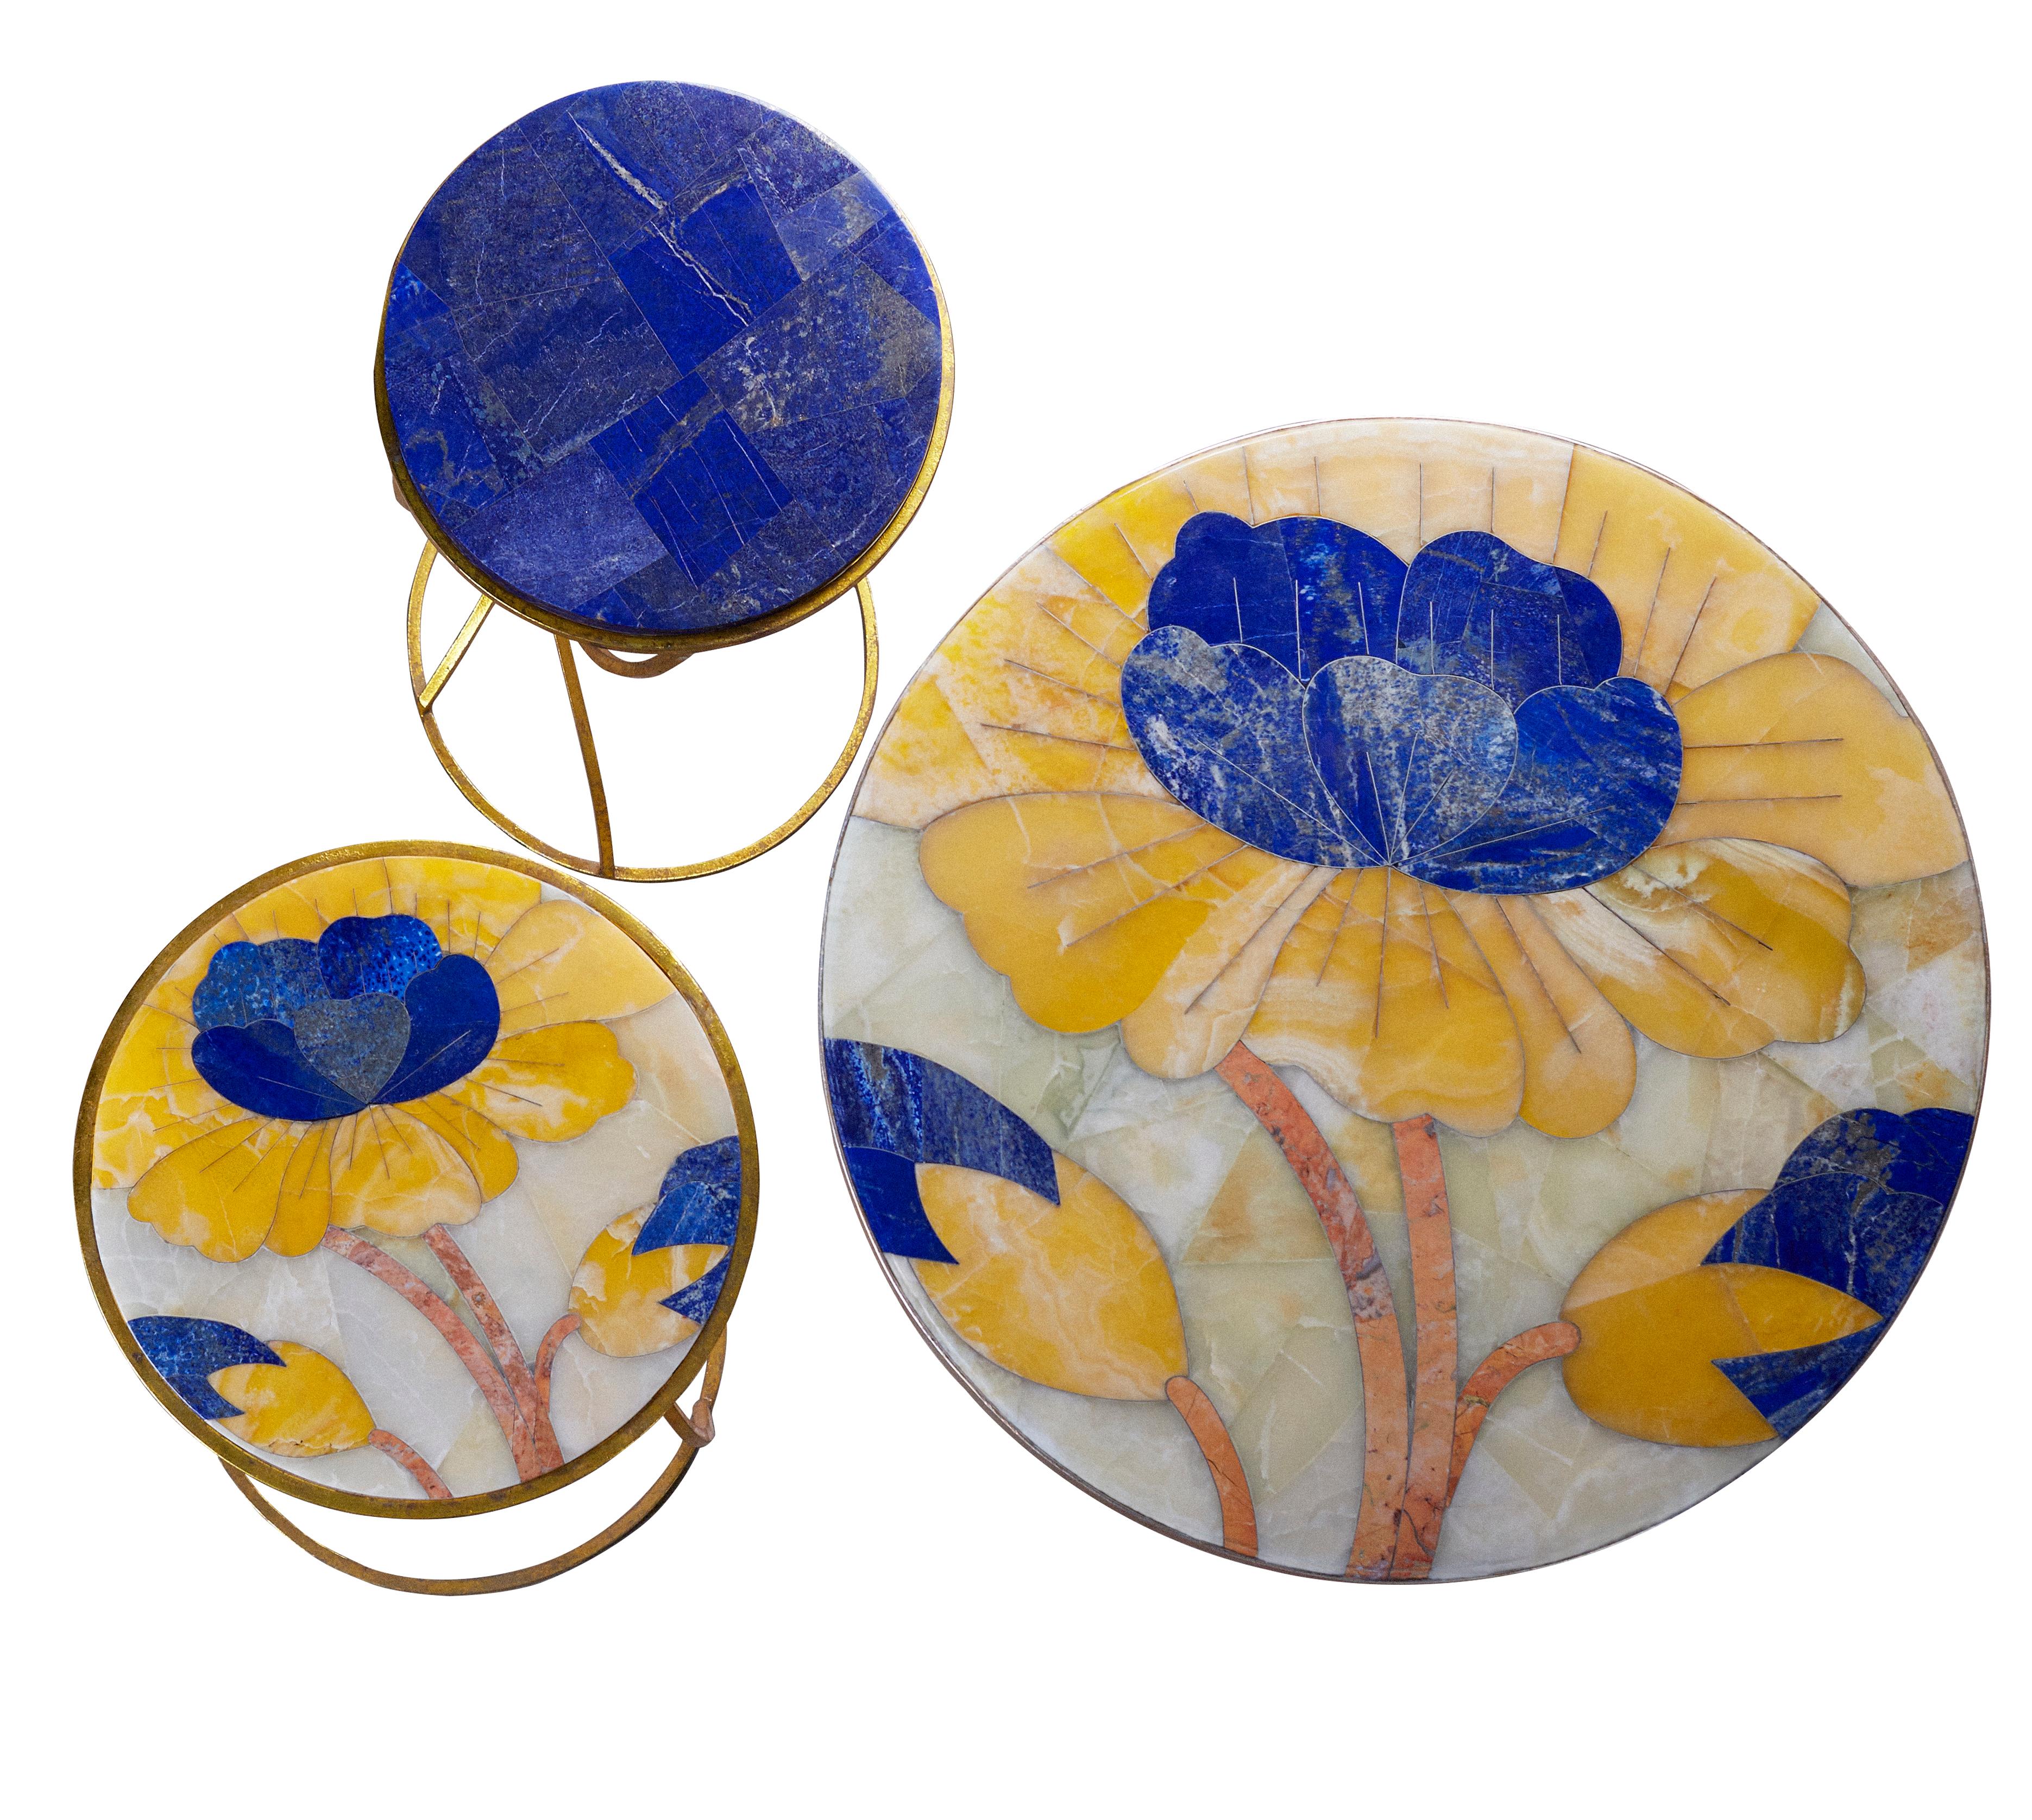 These are handmade from semiprecious stone and marble in a small artisanal workshop. Please note that variations and slight imperfections are part of its design and unique charm.

Lél is a women-led artistic collective based in Peshawar, Pakistan